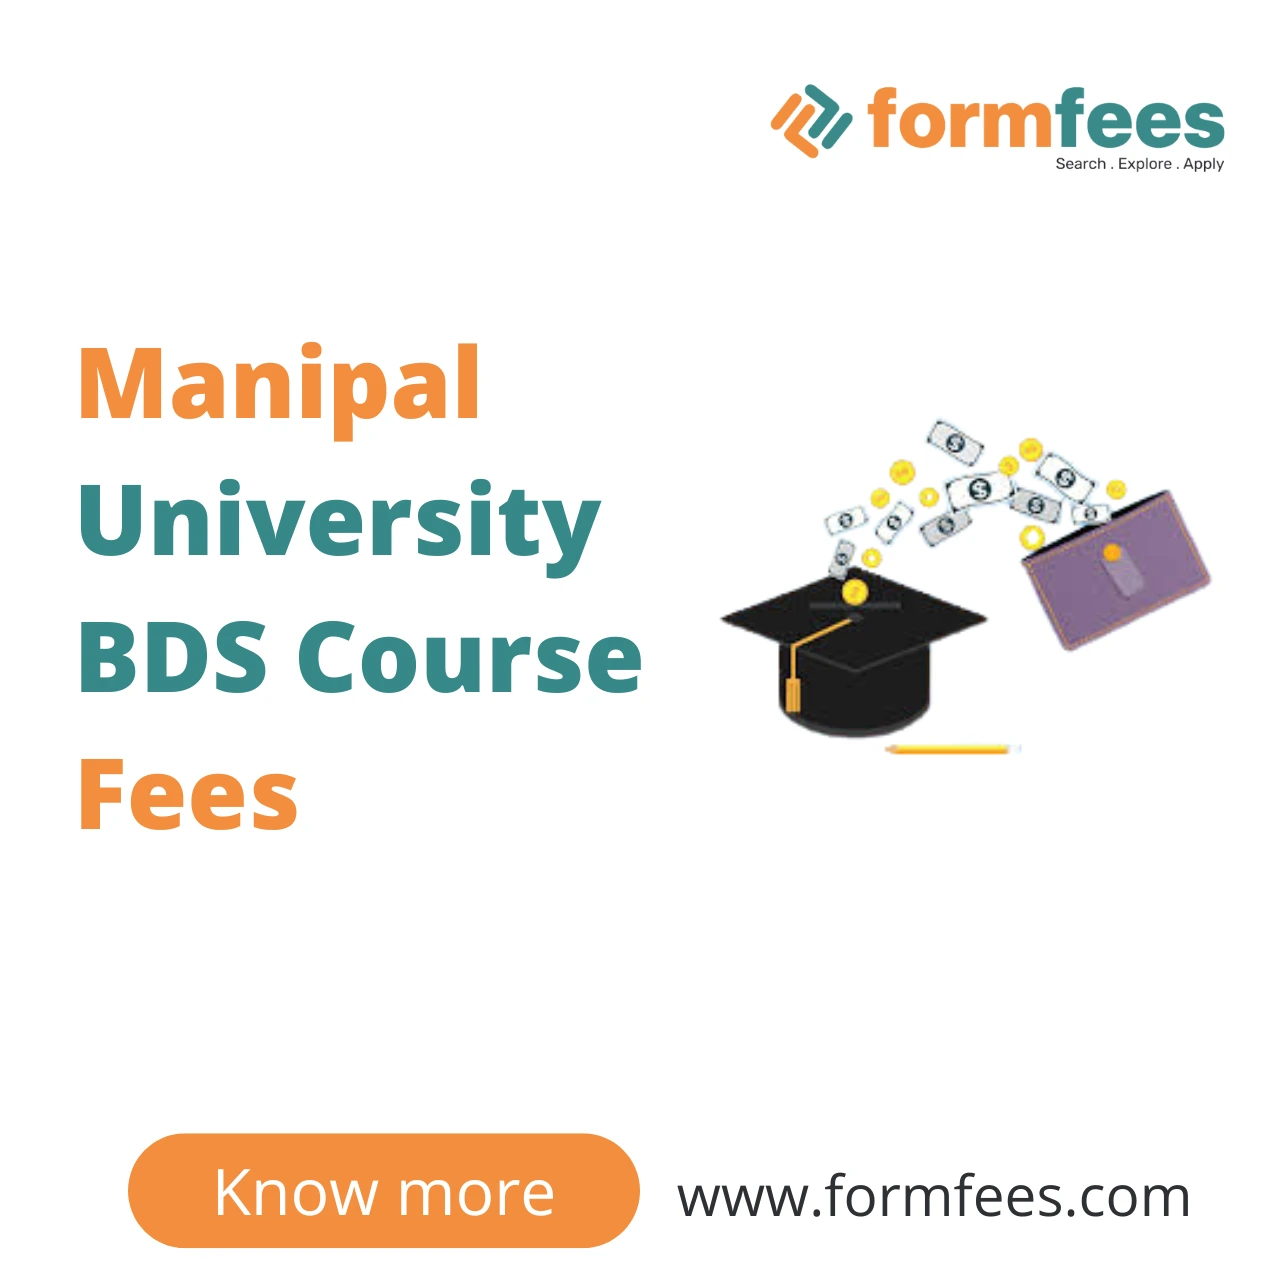 Manipal University BDS Course Fees